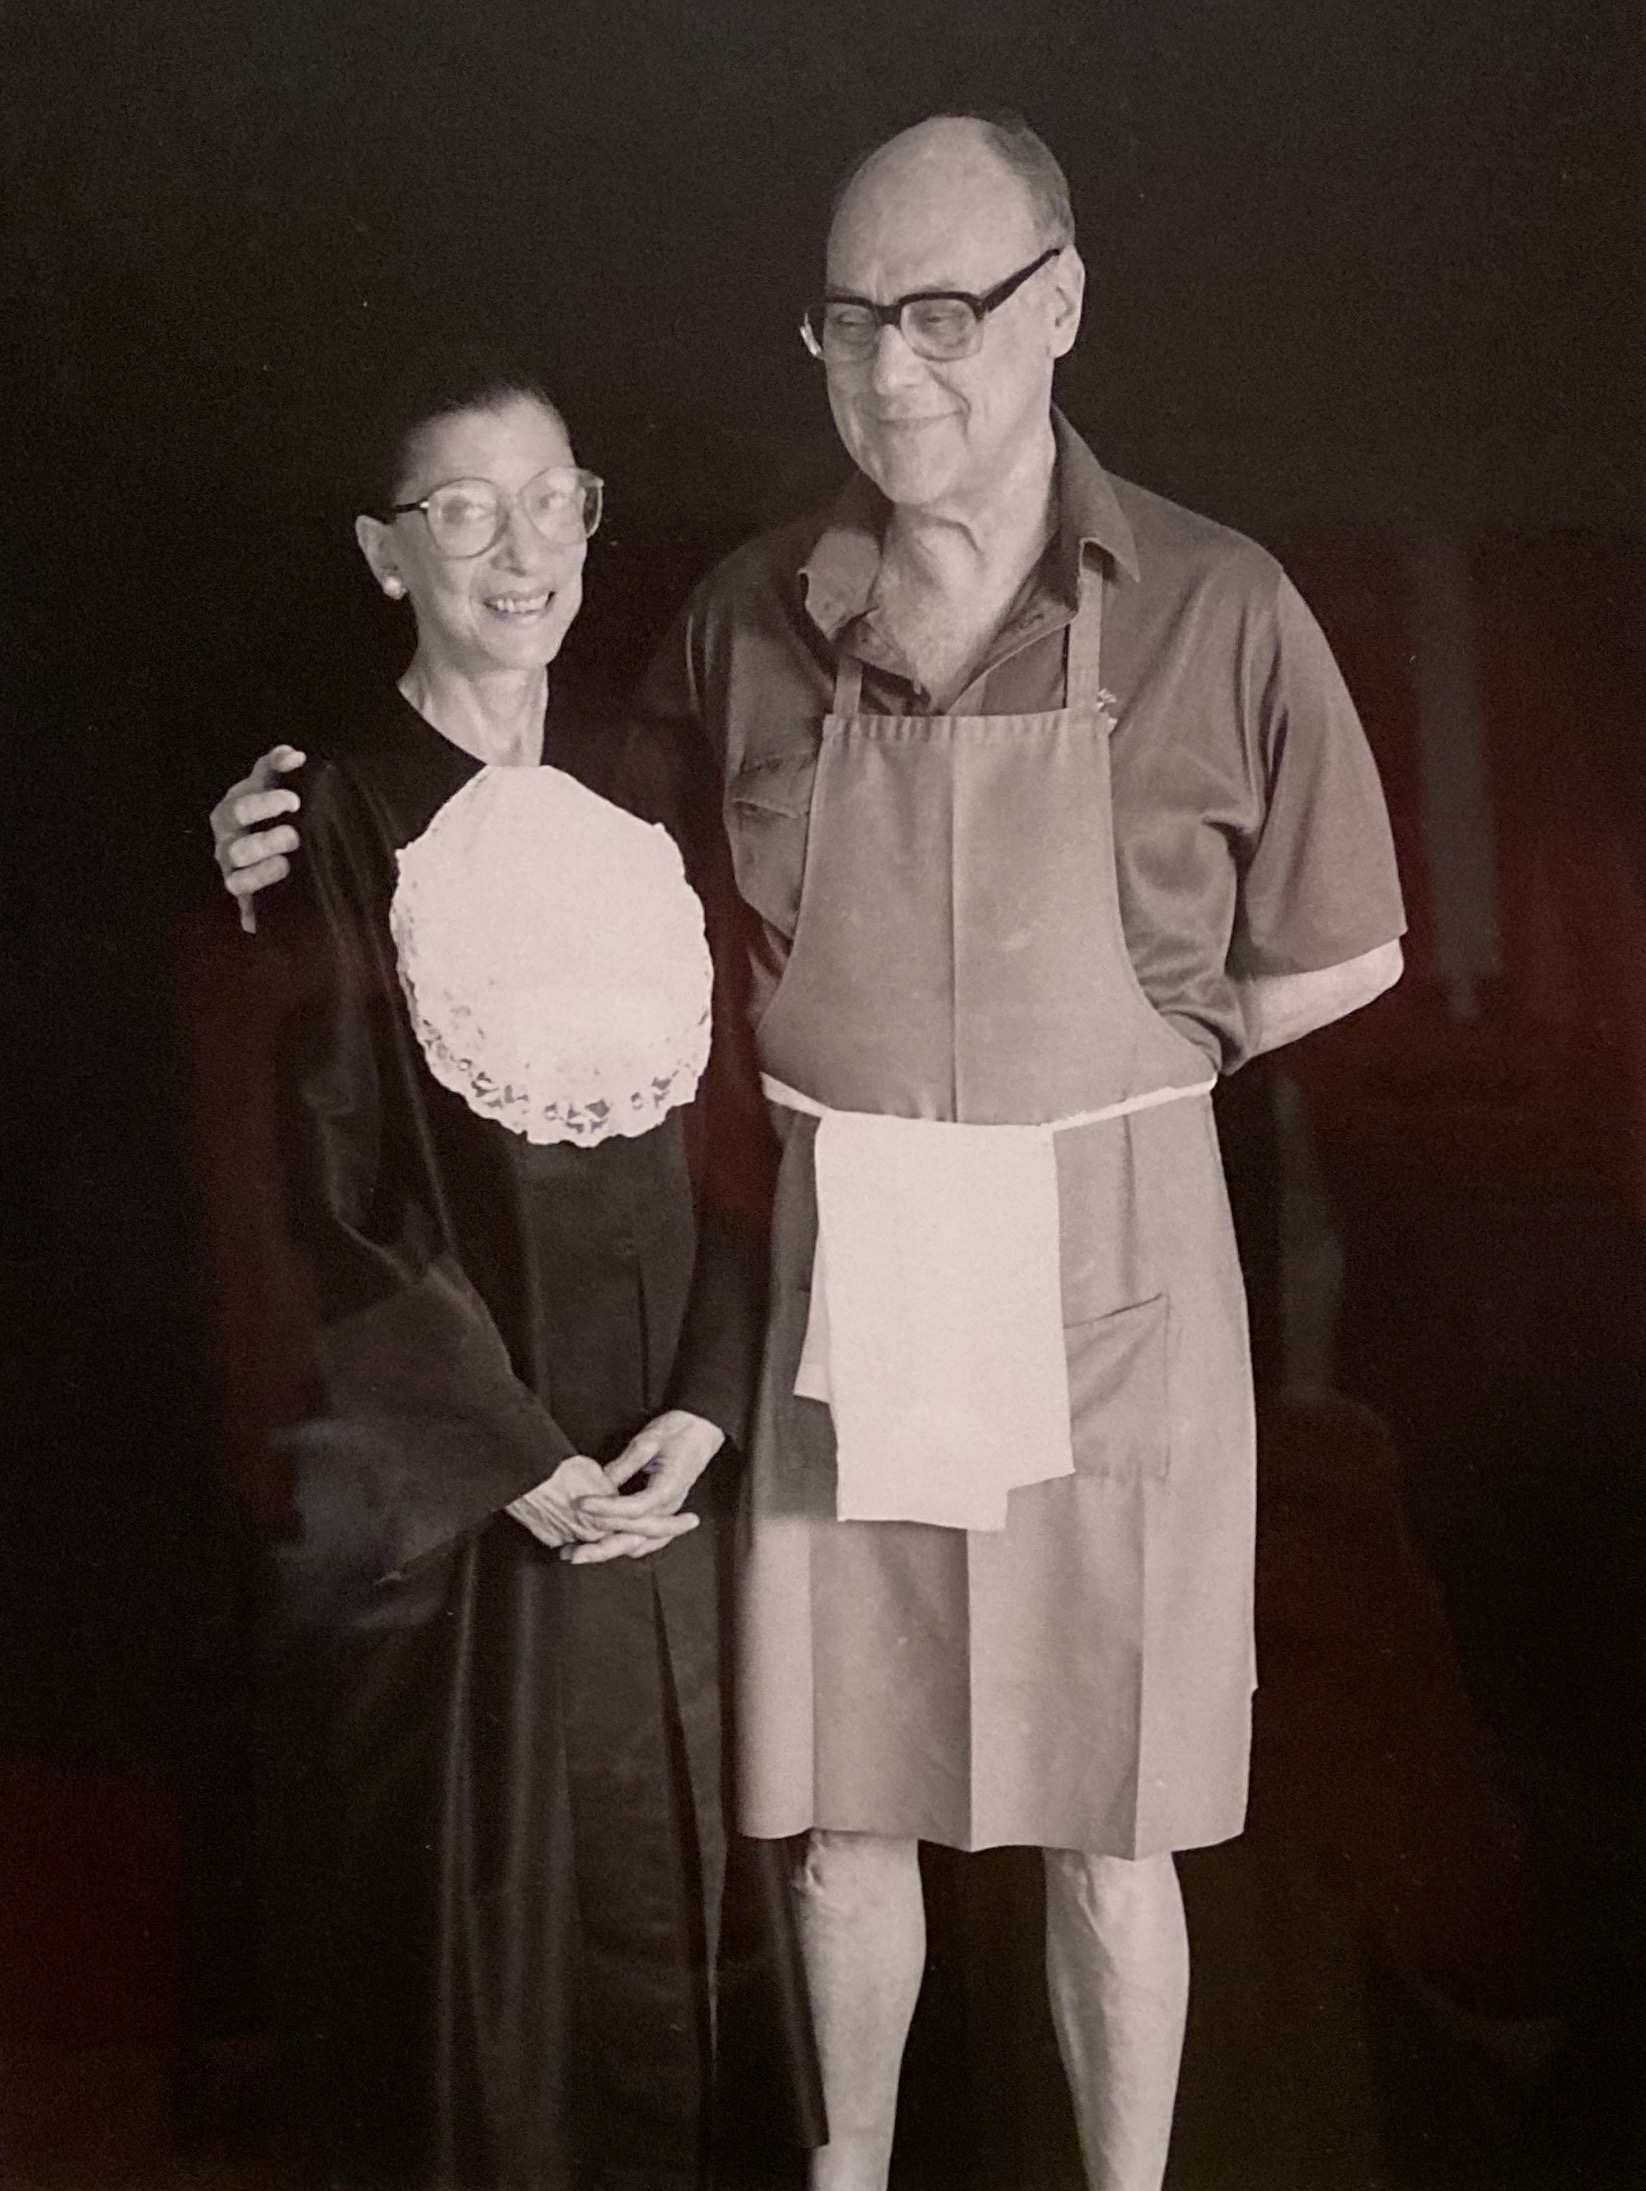 Ruth Ginsburg in a judicial robe and jabot with Marty Ginsburg in an apron